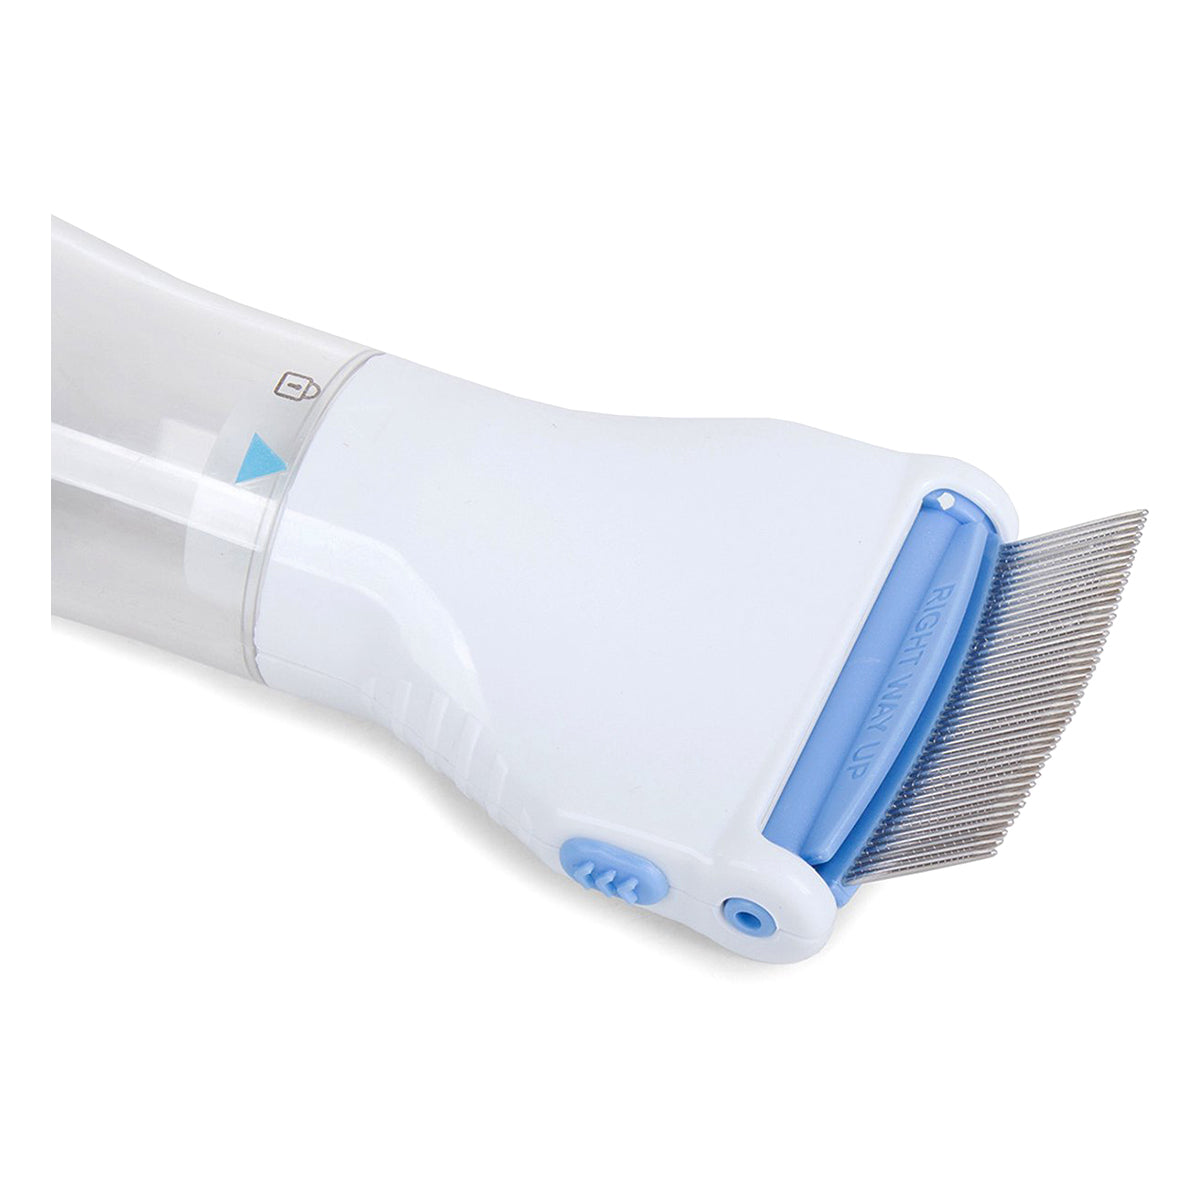 <tc>Ariko</tc>  Electric Lice Comb - With 2x Filter - Electric Lice Combs - Flea Comb - Including Cleaning Brush - Suitable for both humans and animals